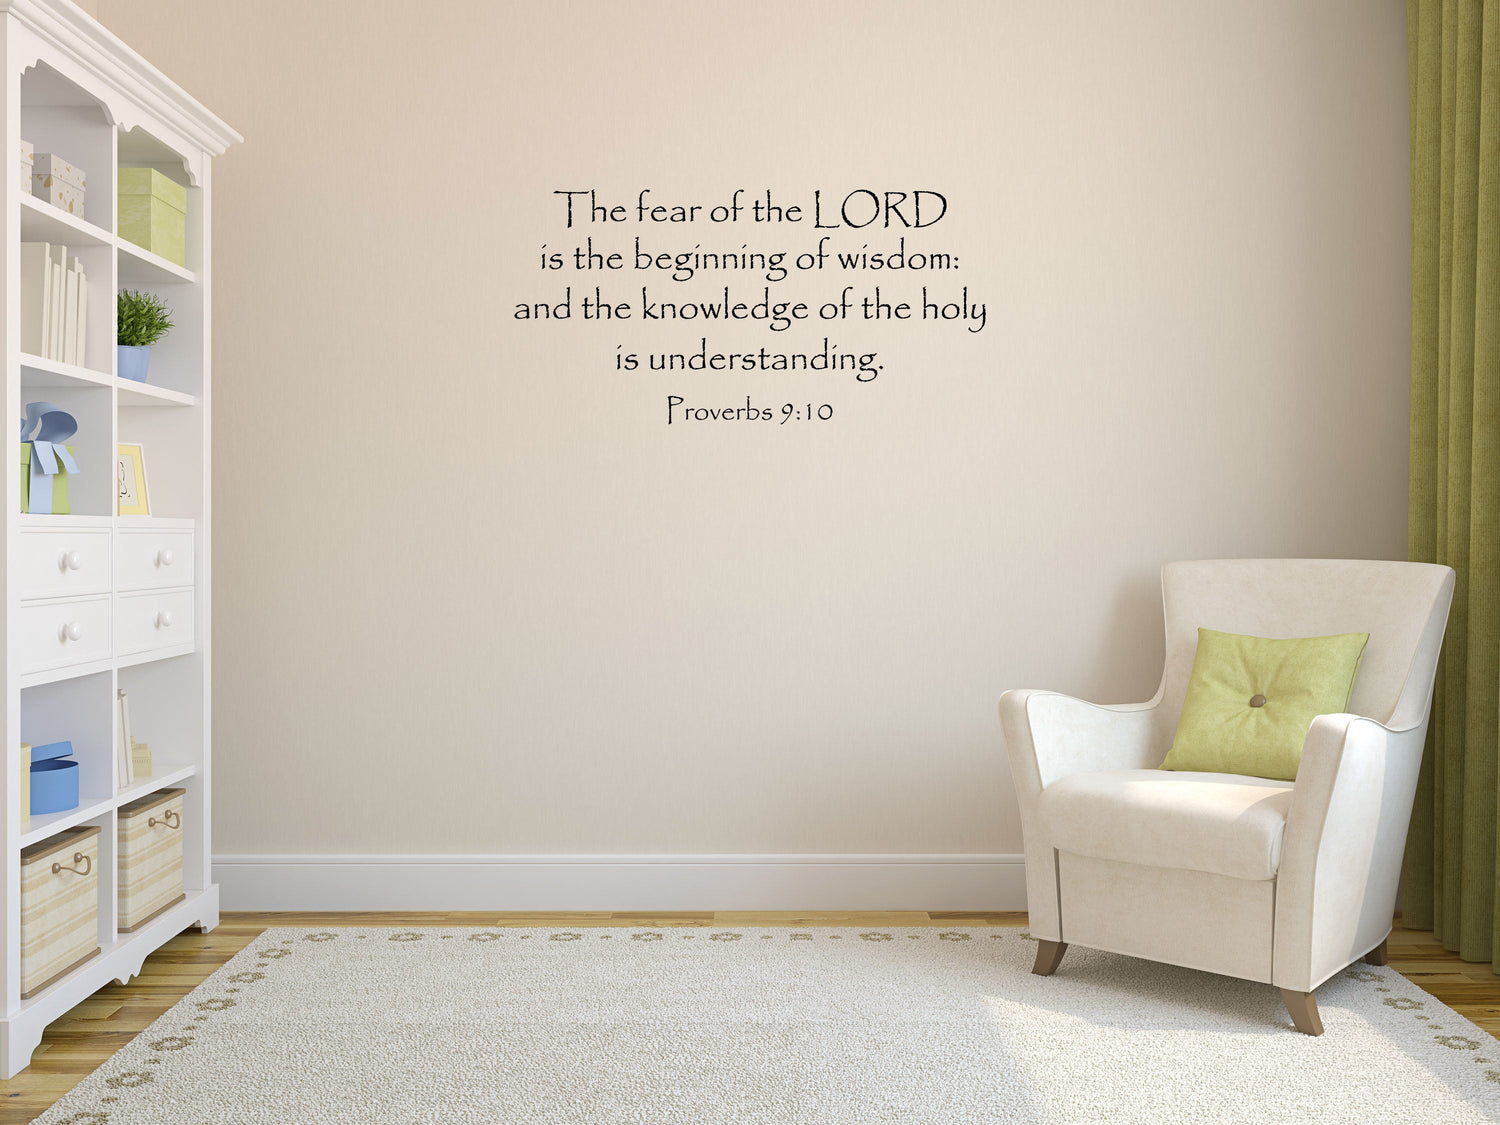  Proverbs 10:22 Vinyl Wall Decal 1 by Wild Eyes Signs The  blessing of the Lord it maketh rich He addeth no sorrow with it, Bible  Scripture, Church Wall Art, Modern Christian